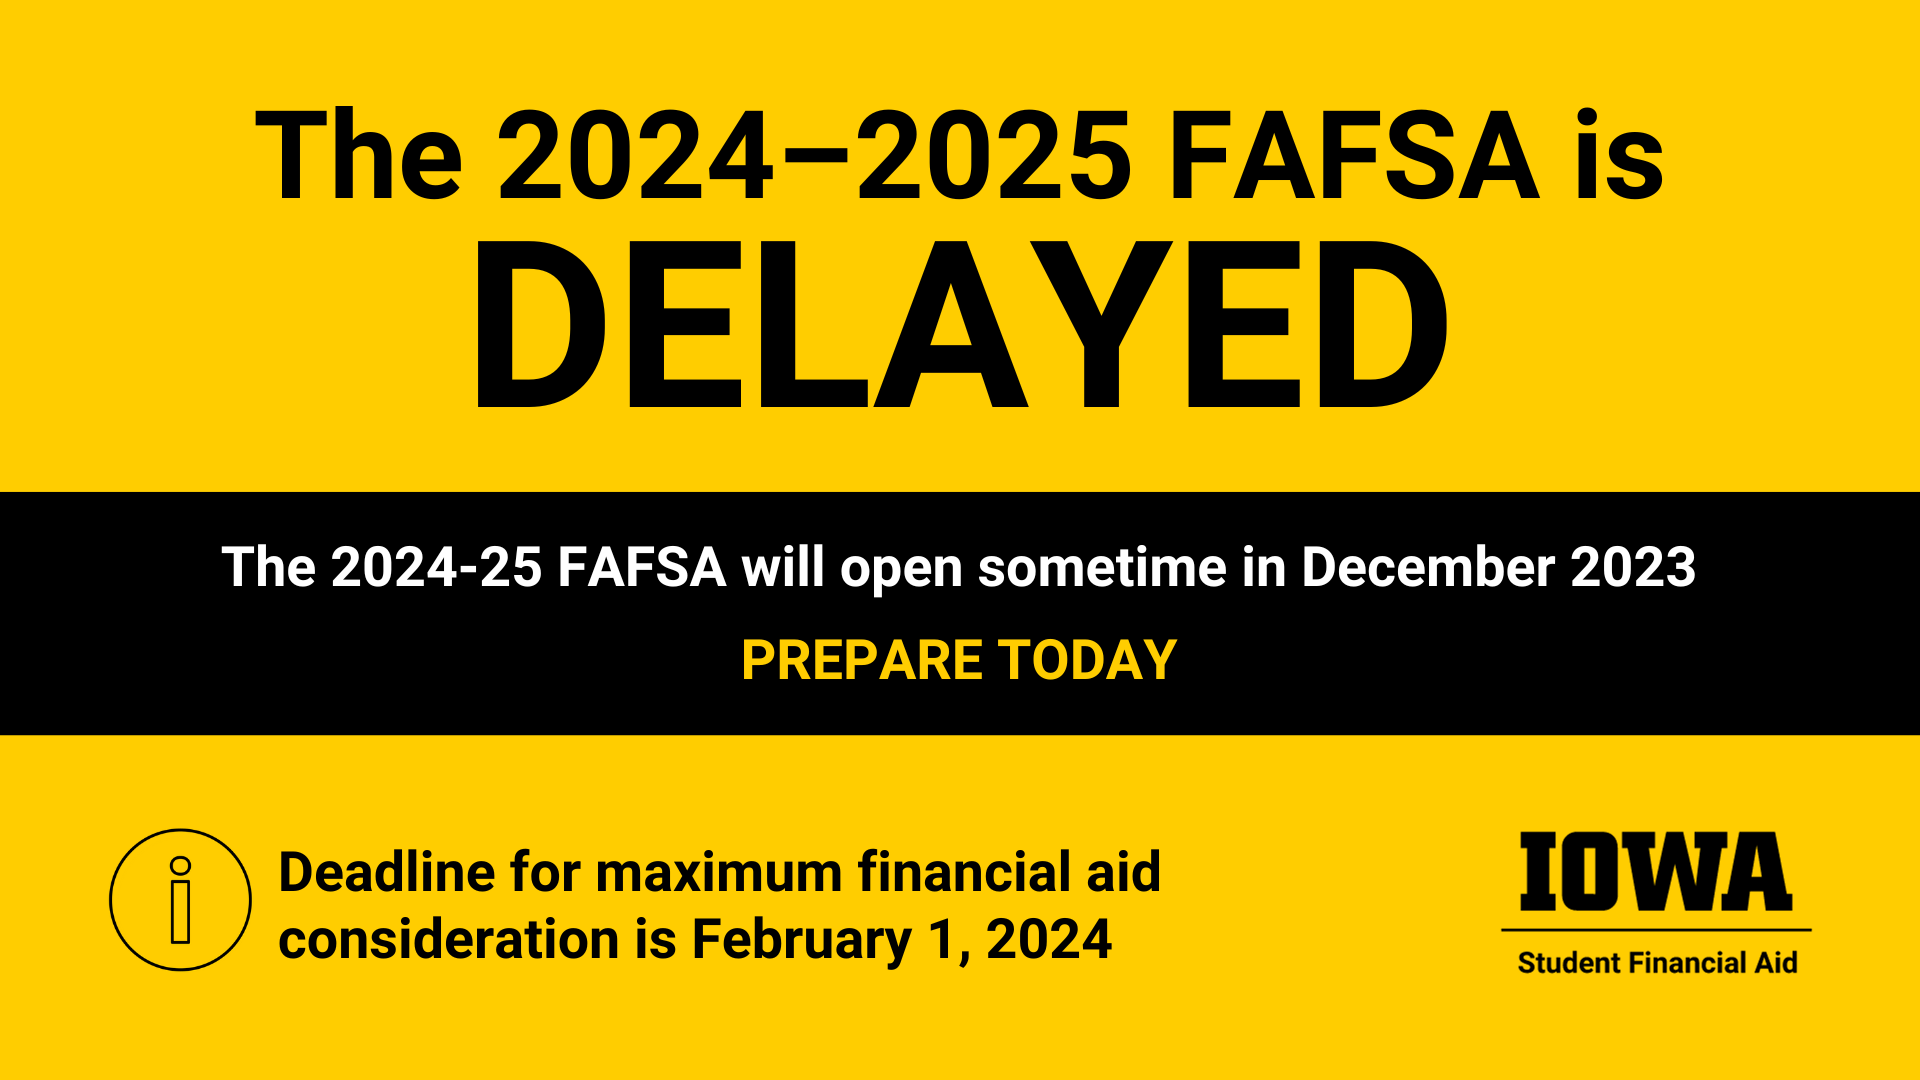 The 2024-25 FAFSA is delayed and will open in December 2023.